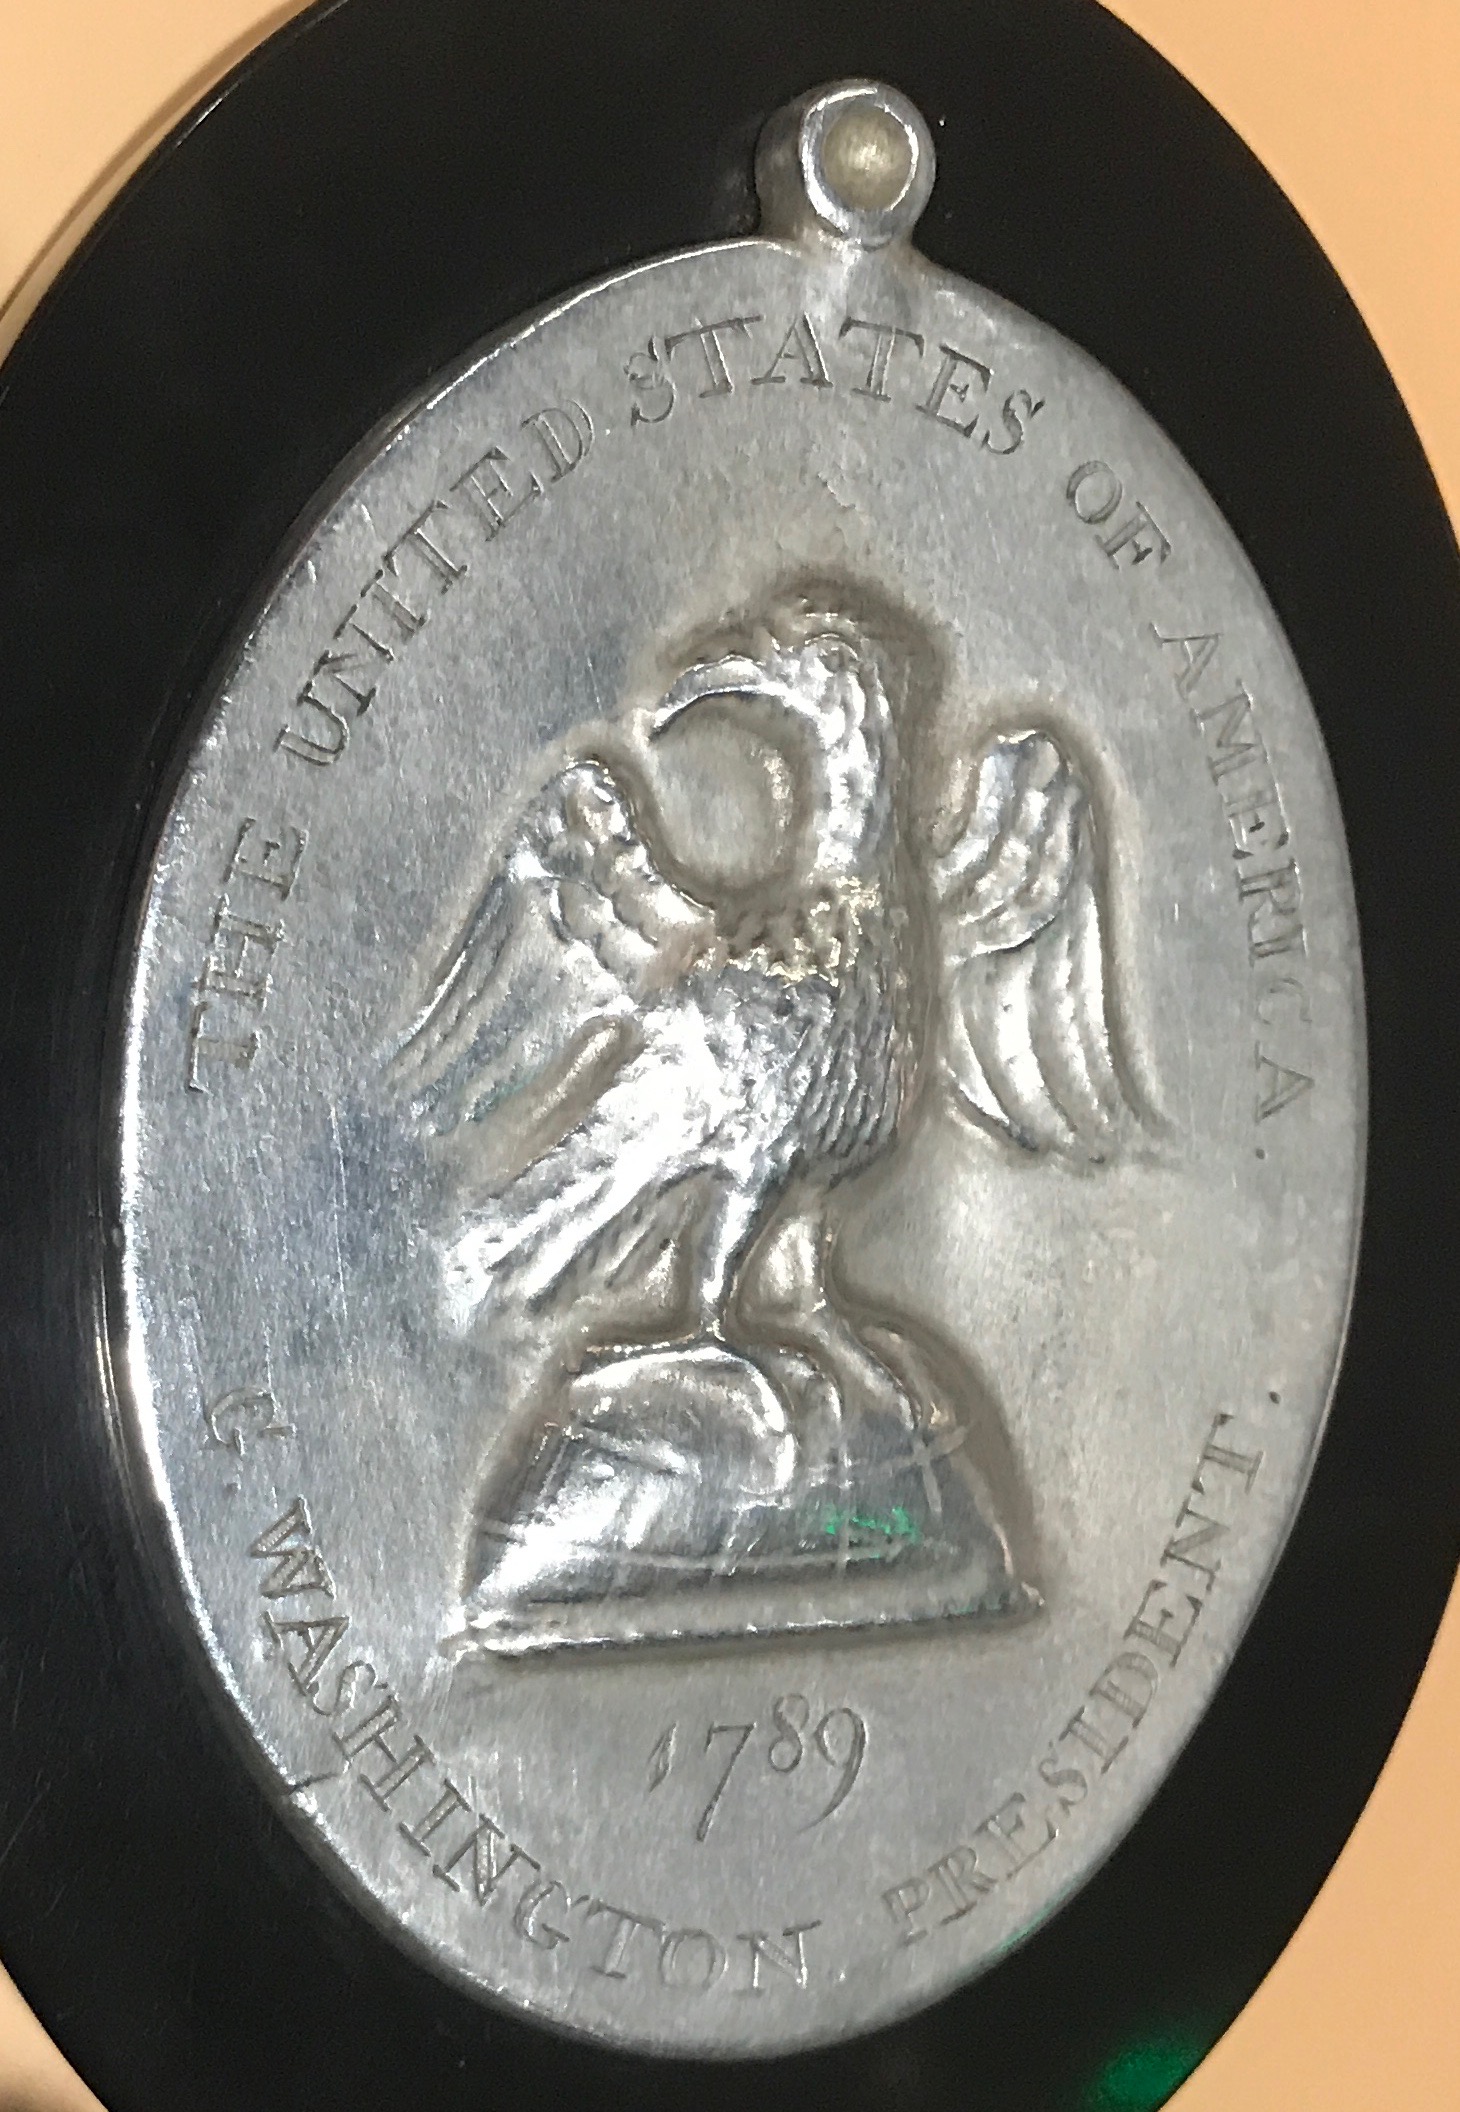  A medal given to the Creek Indians for negotiating a treaty with George Washington, found in 1929 near the Tallapoosa River, is on display at the Museum of Alabama in Montgomery.   